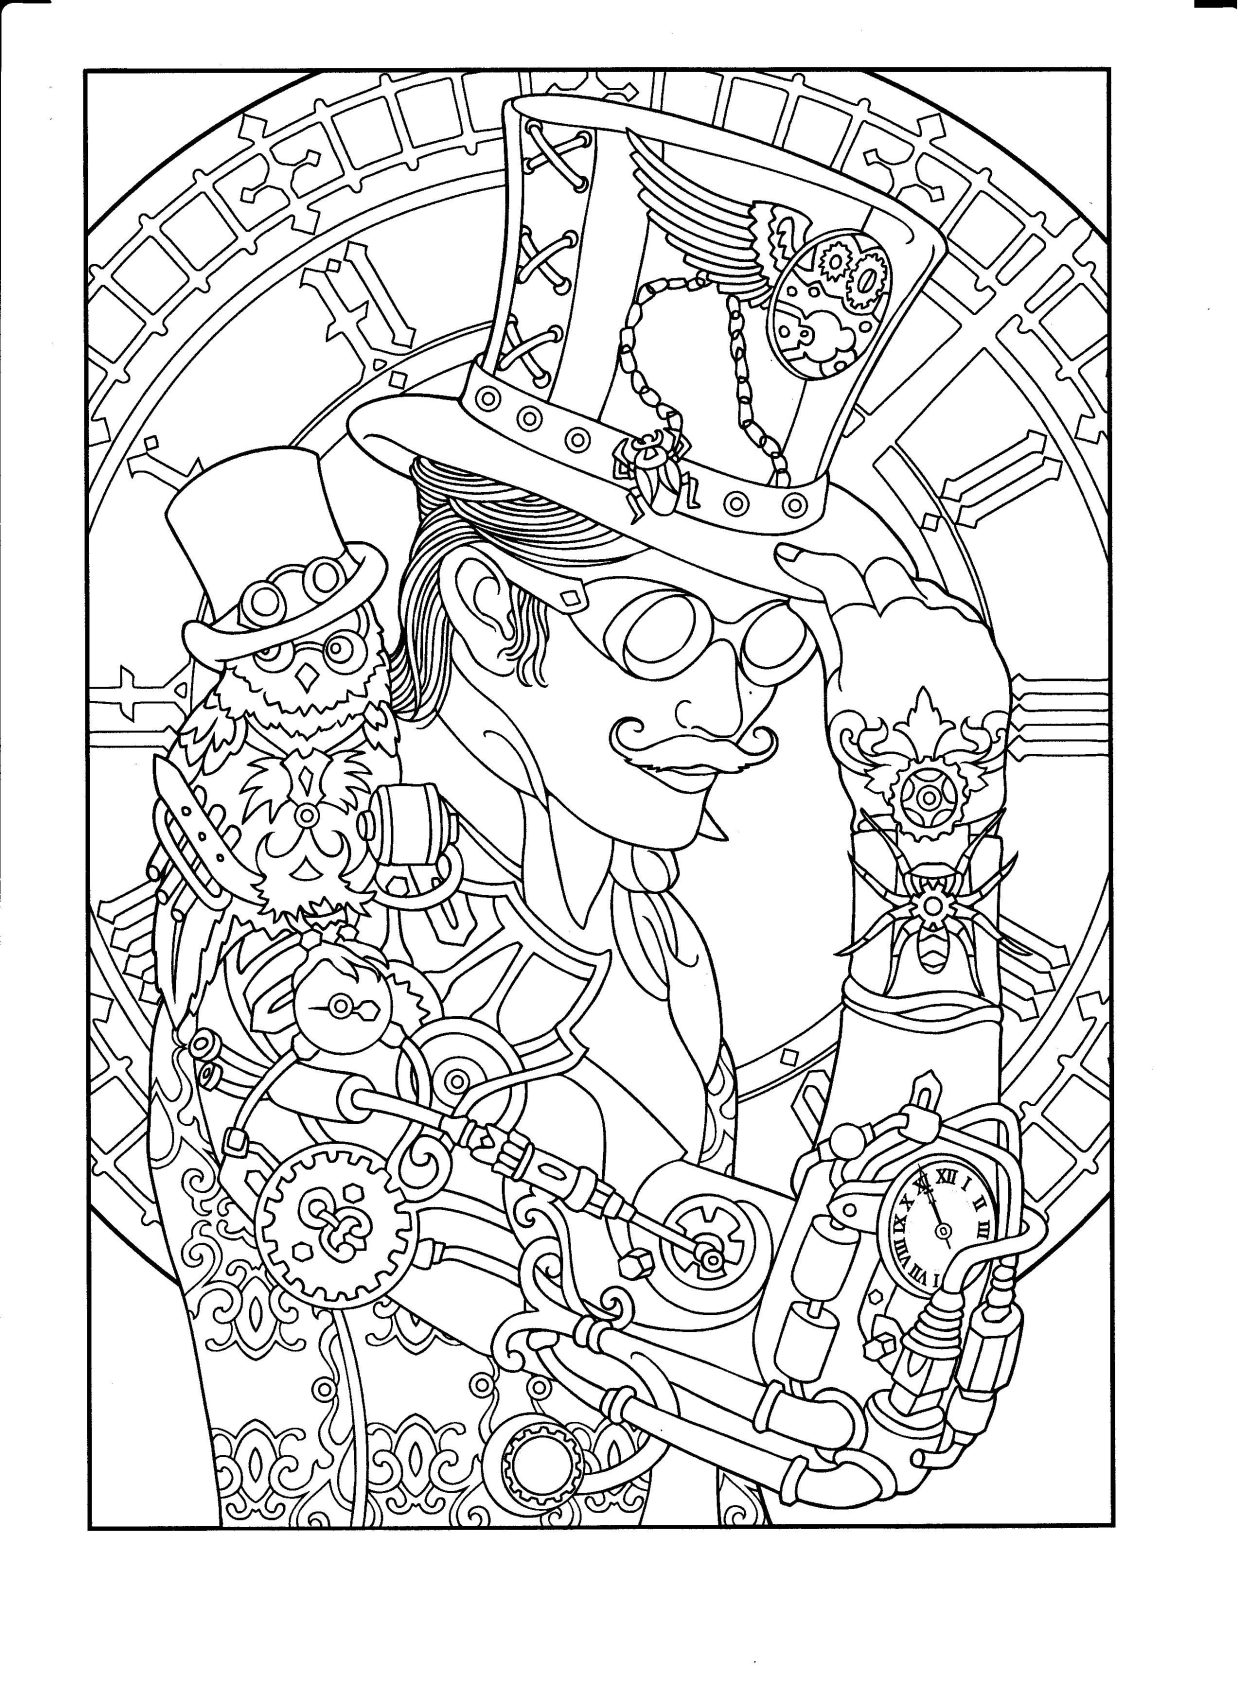 Discover the Best Steampunk Coloring Pages for Free Printable Fun